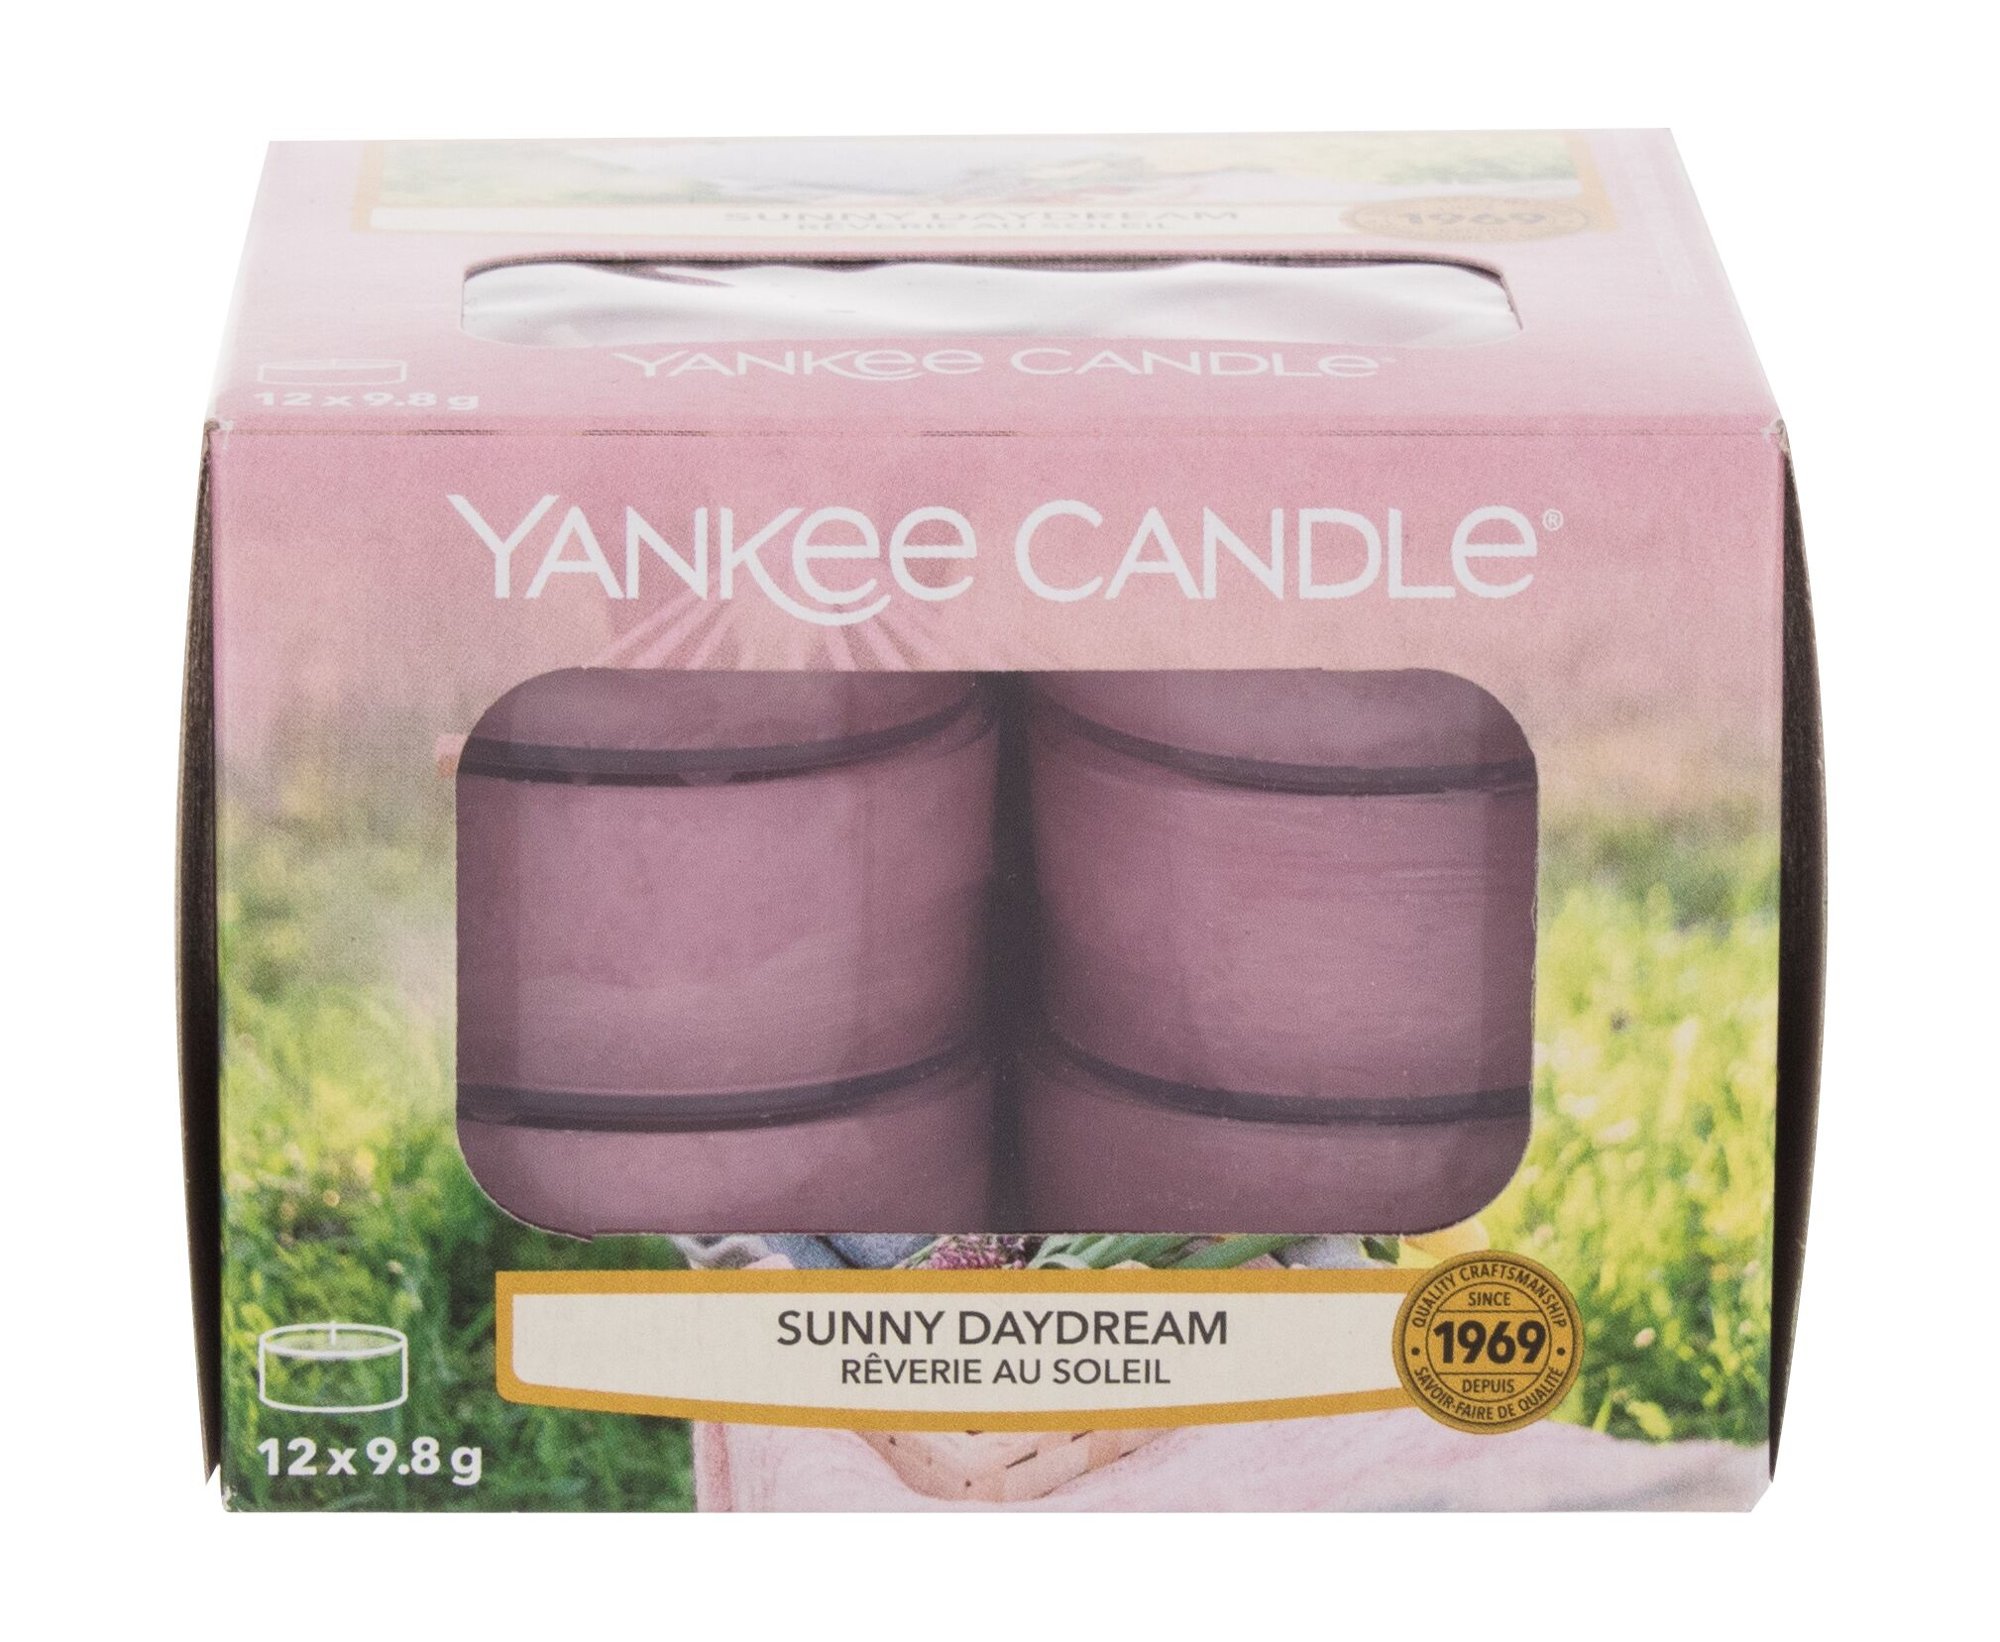 Yankee Candle Sunny Daydream 117,6g Kvepalai Unisex Scented Candle